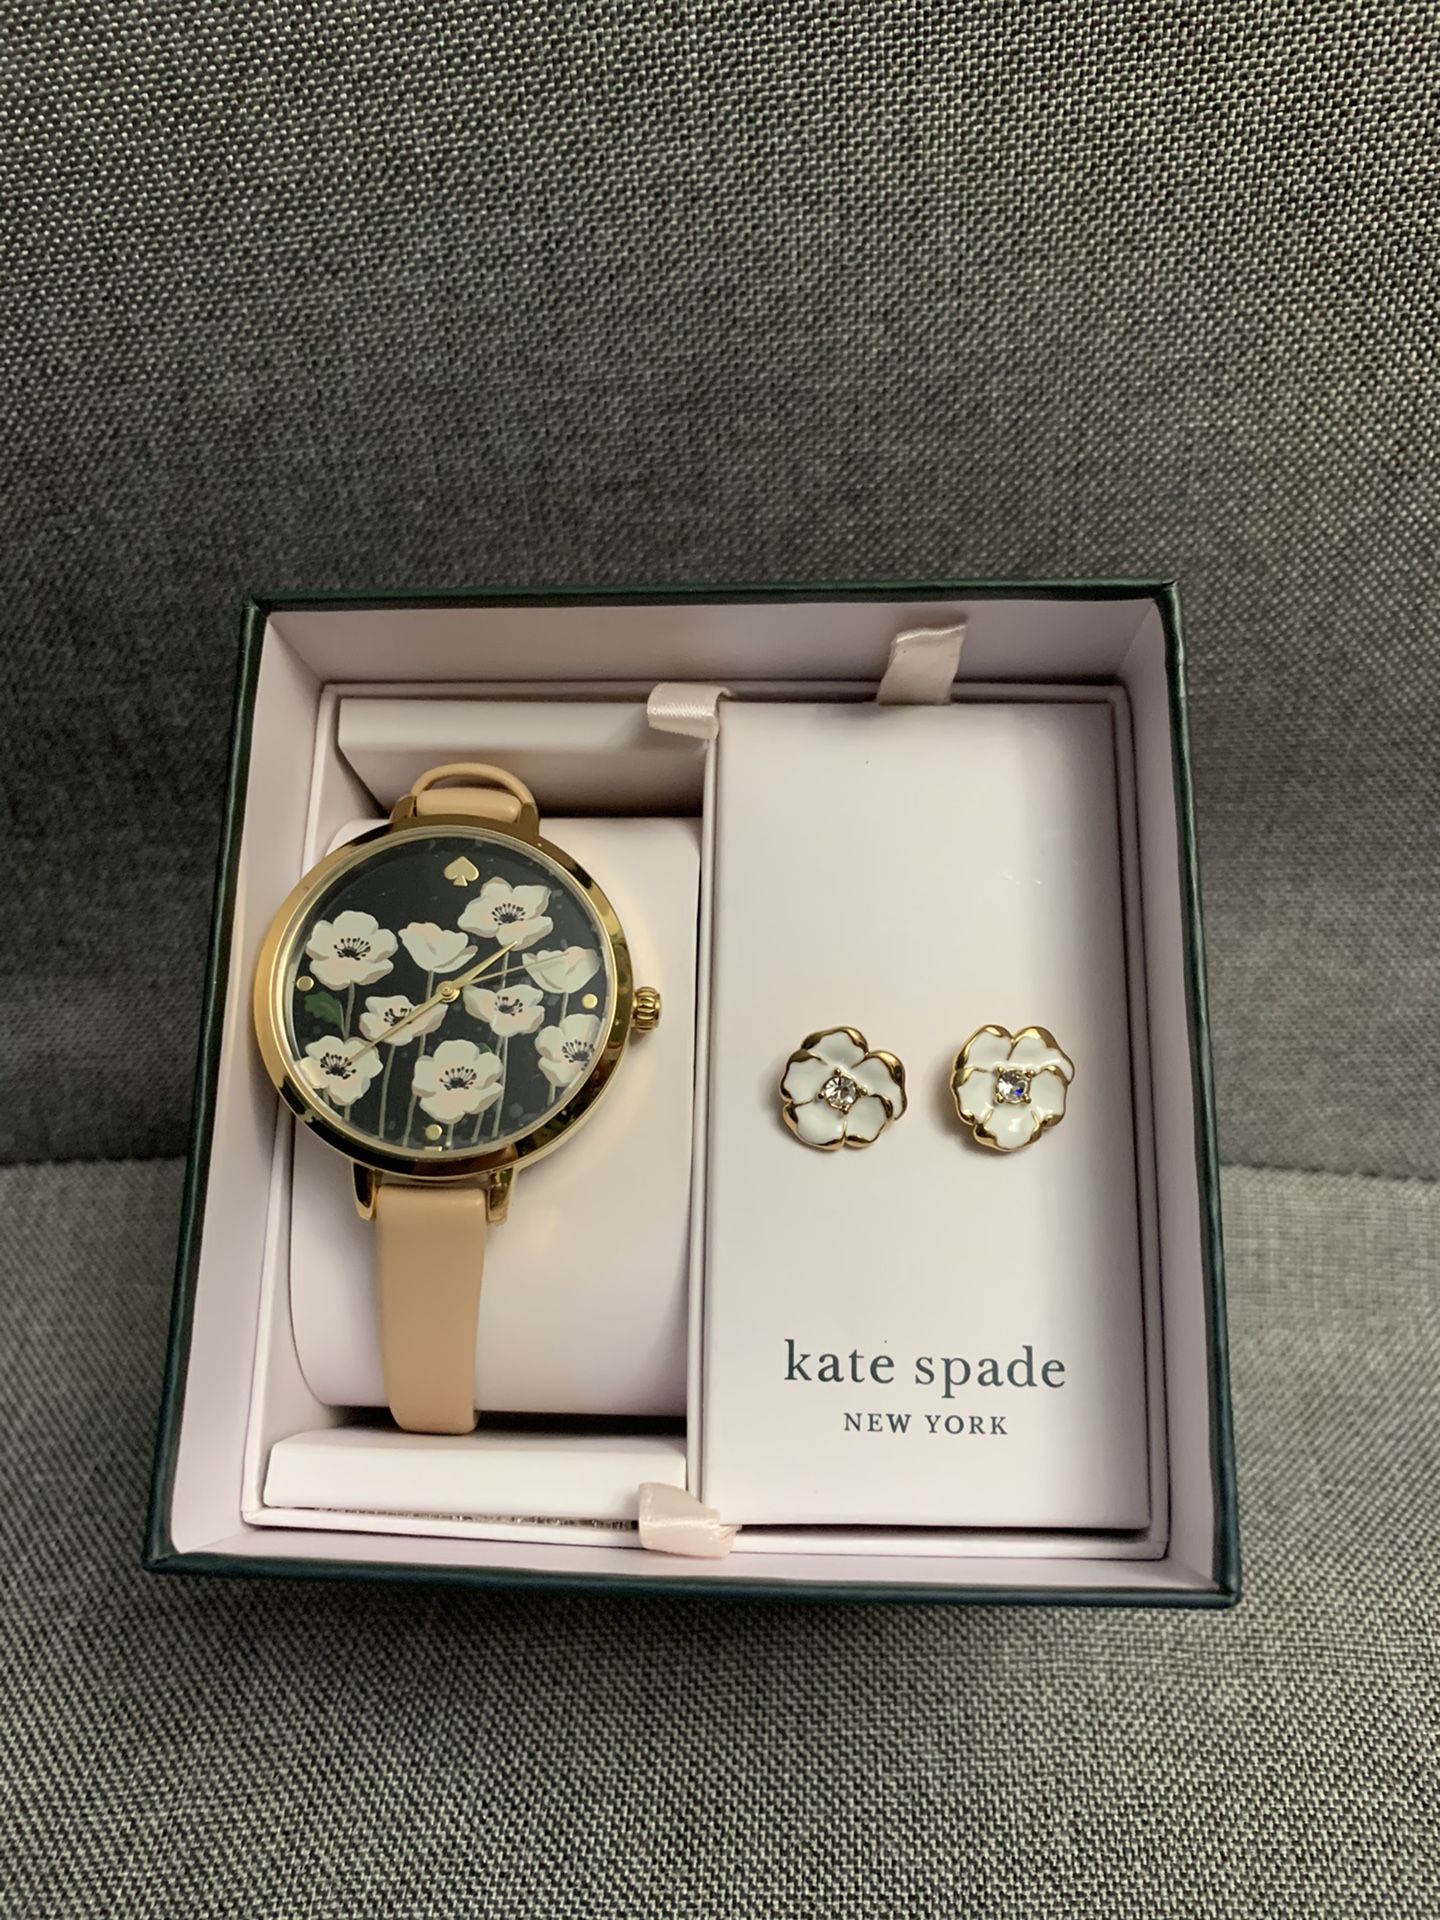 NEW! Kate Spade Watch with matching Earrings for Women